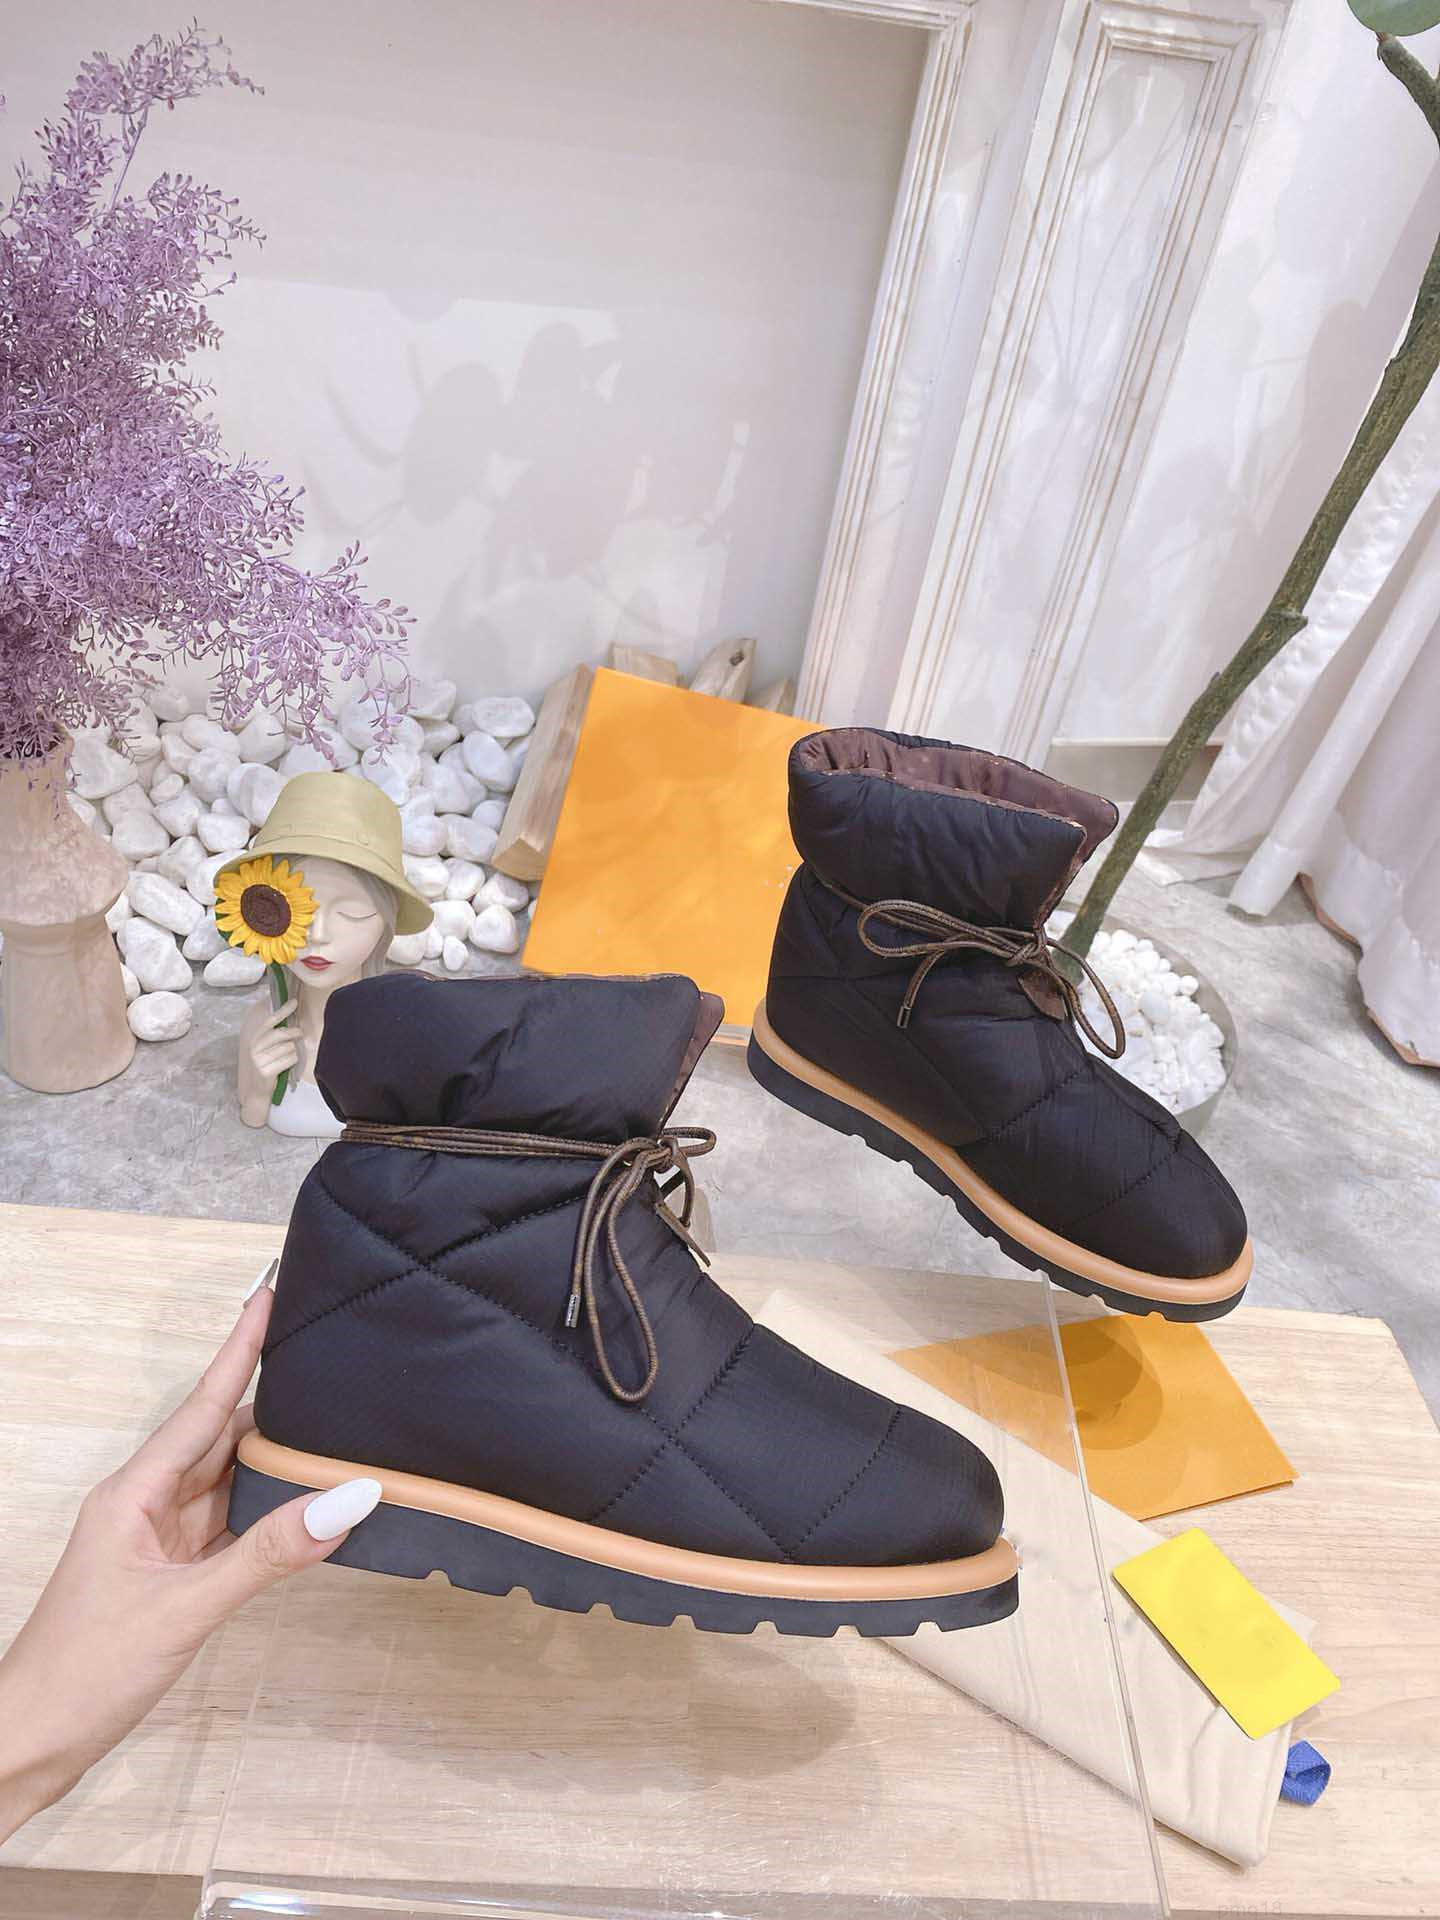 

Luxury Designer PILLOW Comfort Ankle Boots Women Fashion Soft Down Shoe Flat Shoes Waterproof nylon upper Winter To Keep warm Boot Size 35-41, Don't buy it